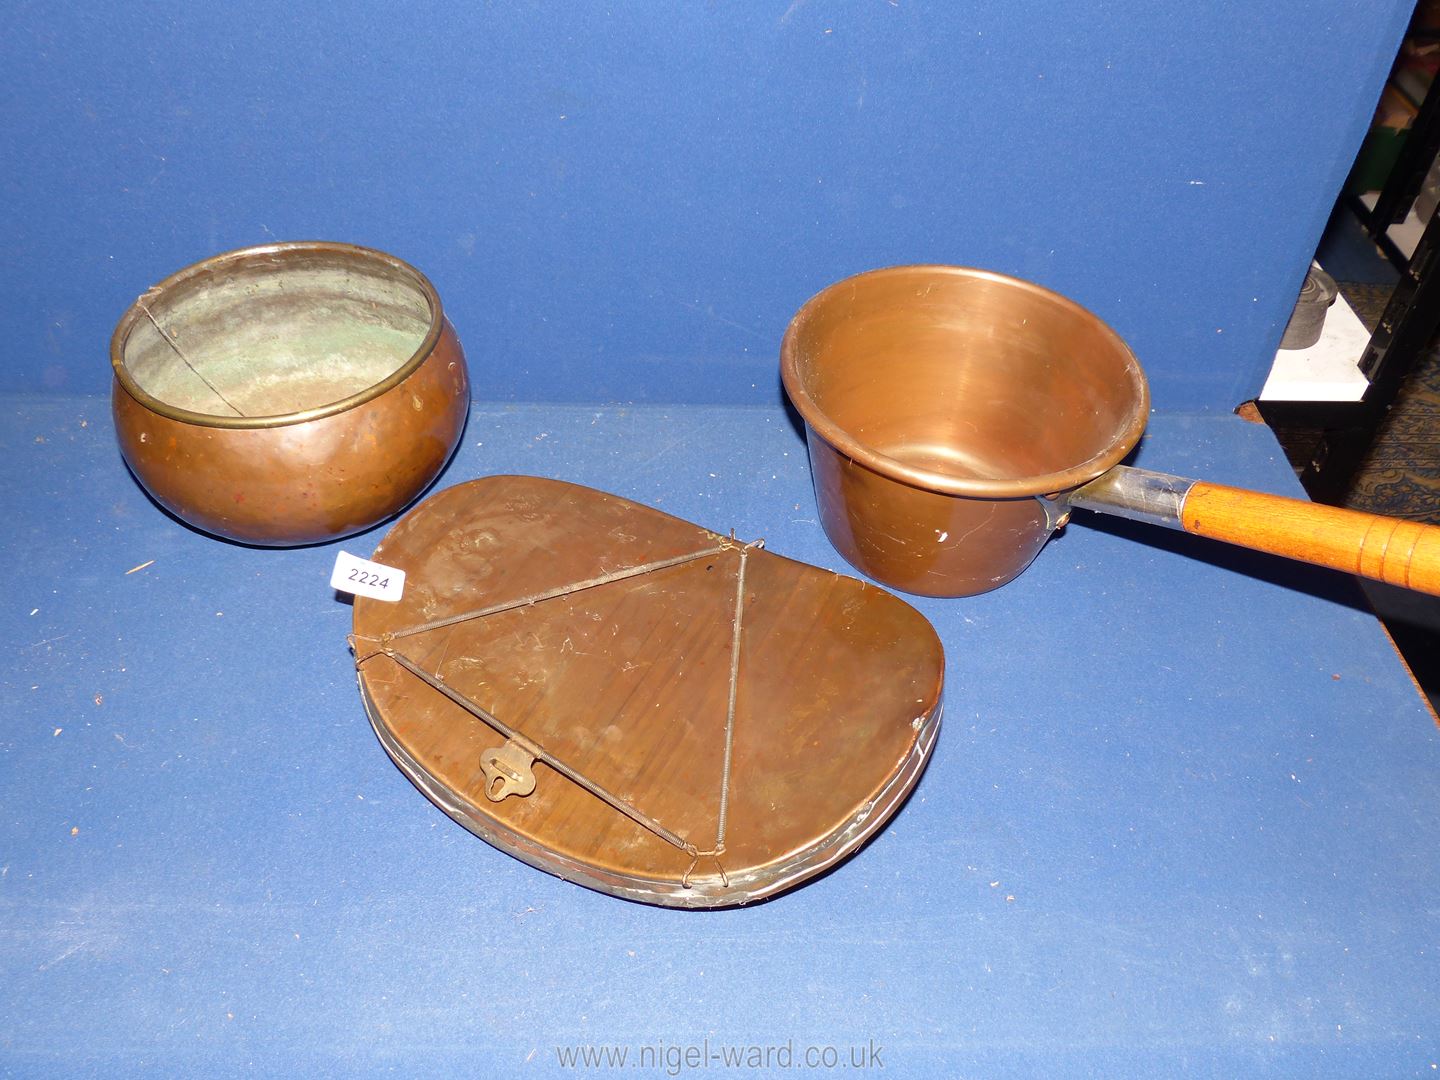 Three pieces of copper including a Belly Warmer hot water bottle, saucepan and bowl.